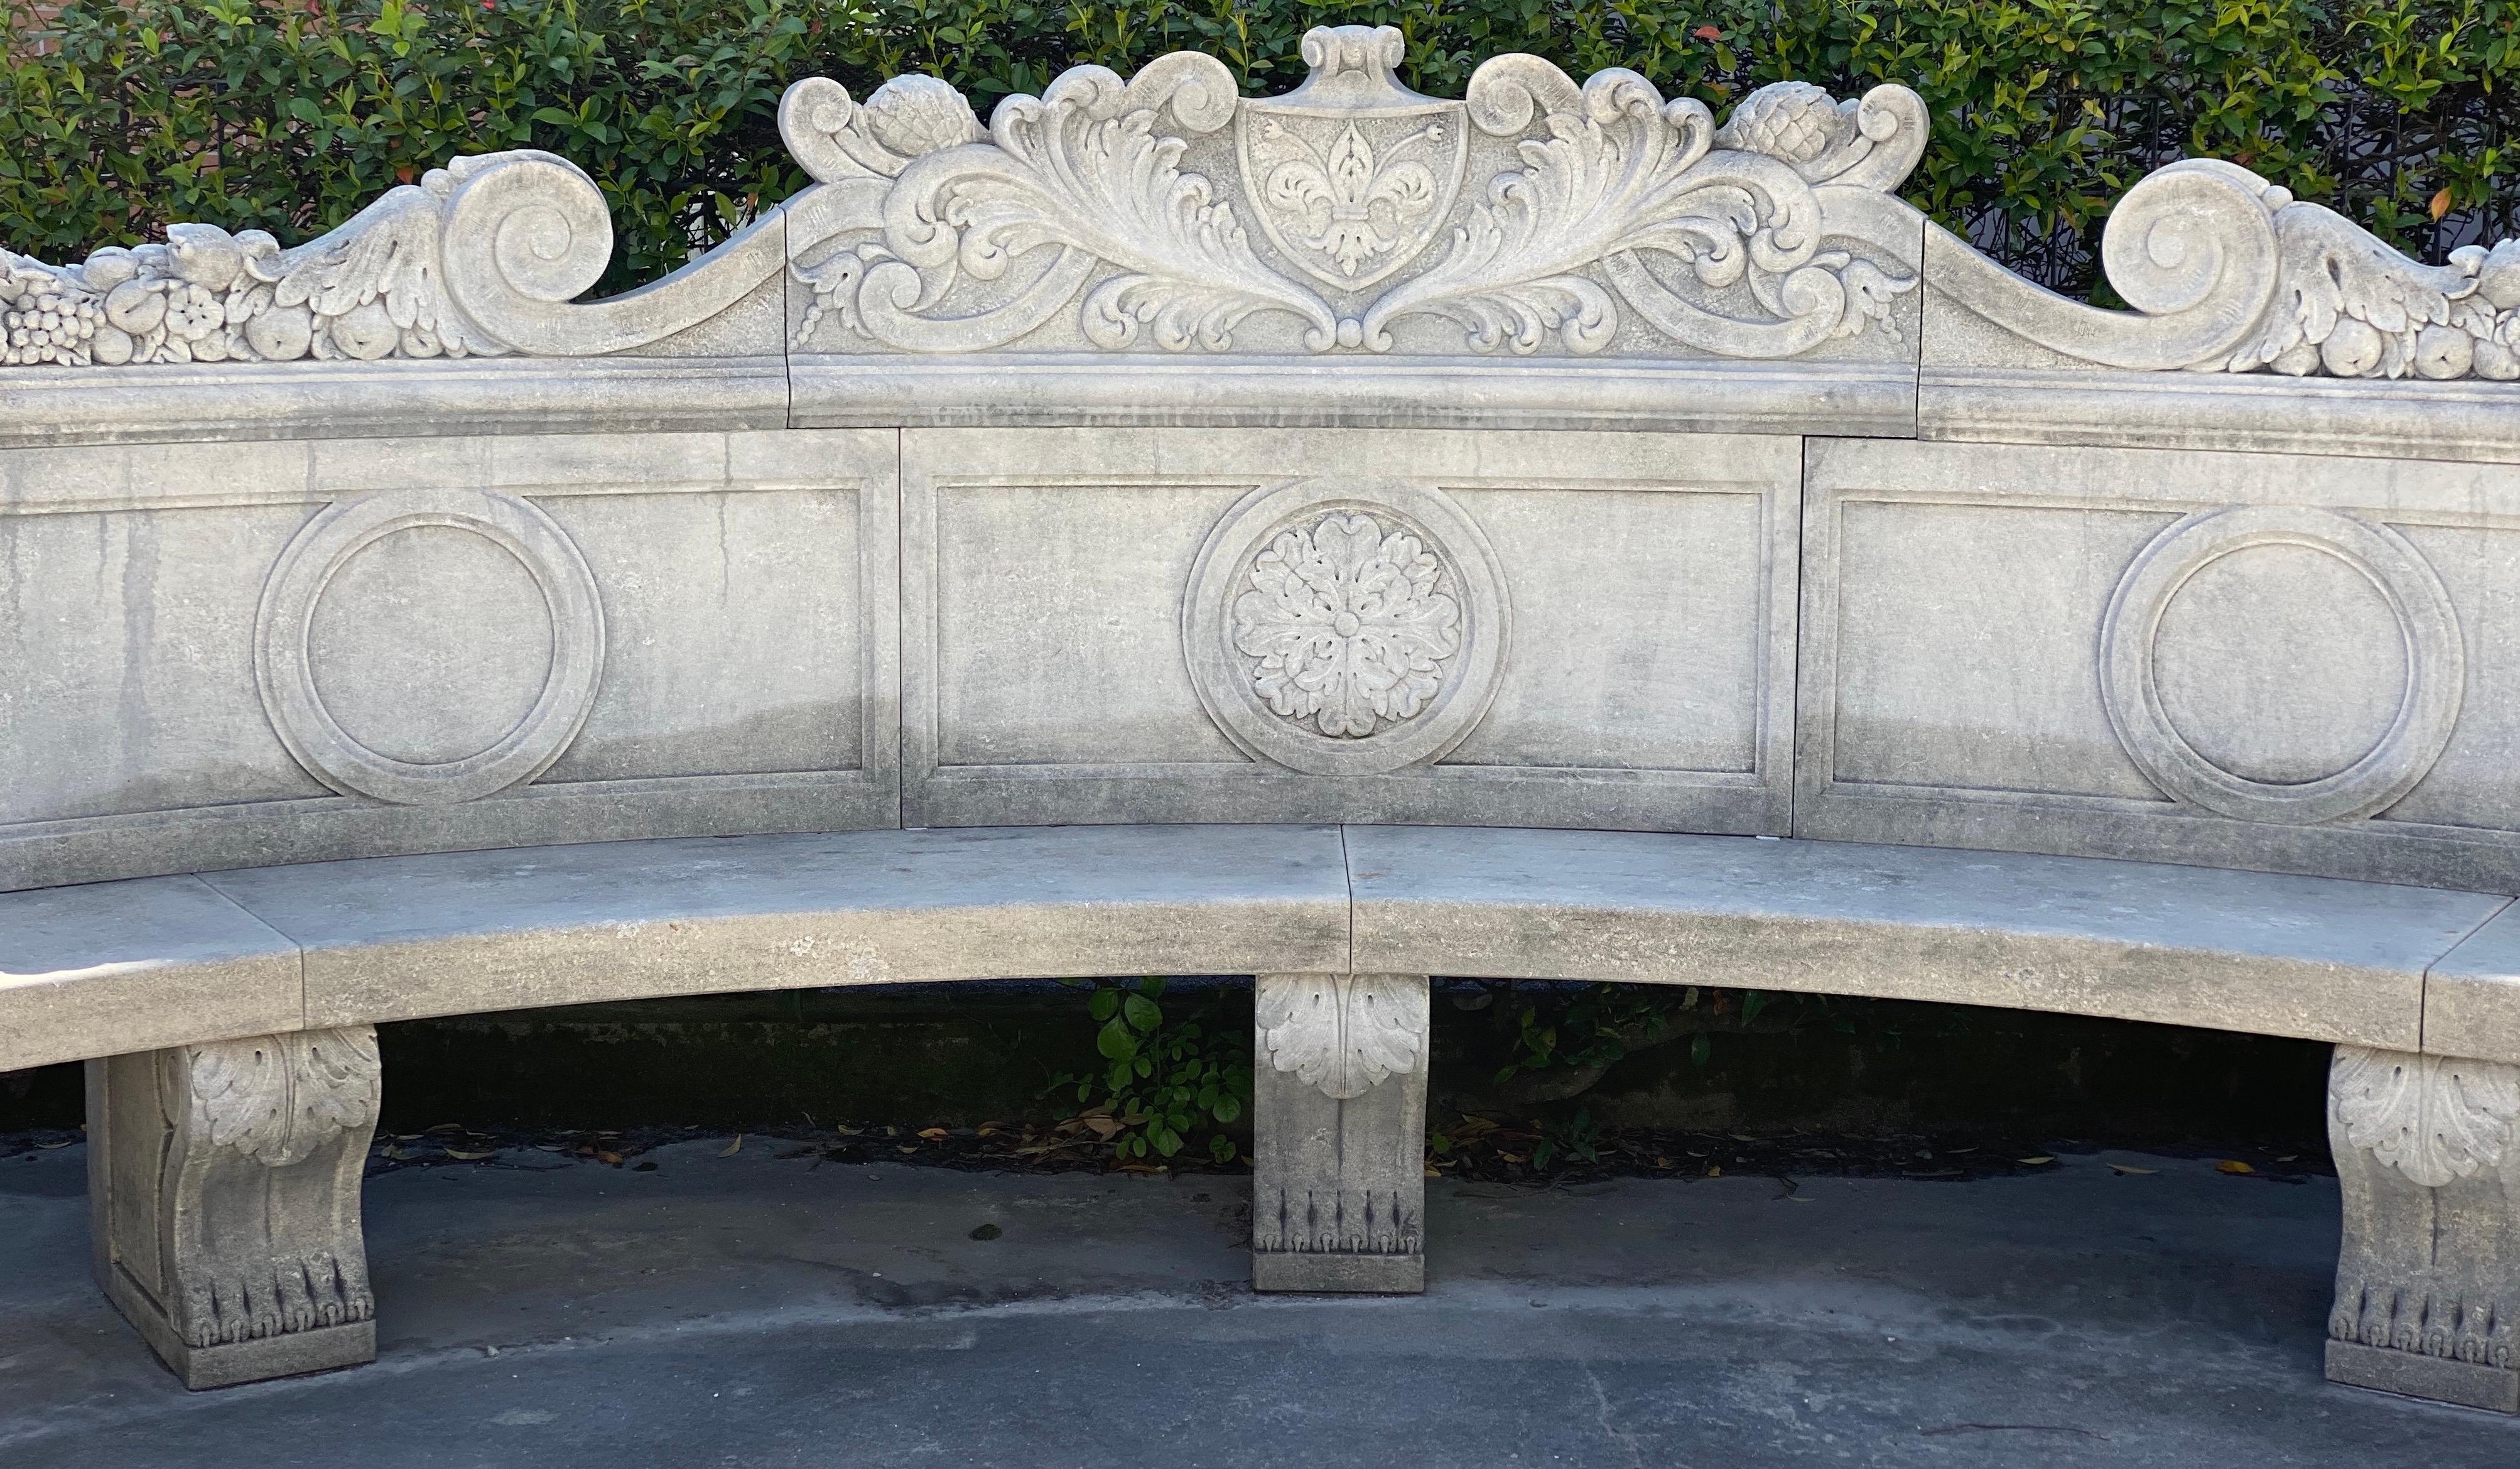 Exceptional craftsmanship with stunning motifs in relief in ' Pietra di Vicenza'. Rich decoration of the armrest with Griffins and garland -
Great decoration for Garden and Patio furniture.
This bench can be disassembled and the glasses individually